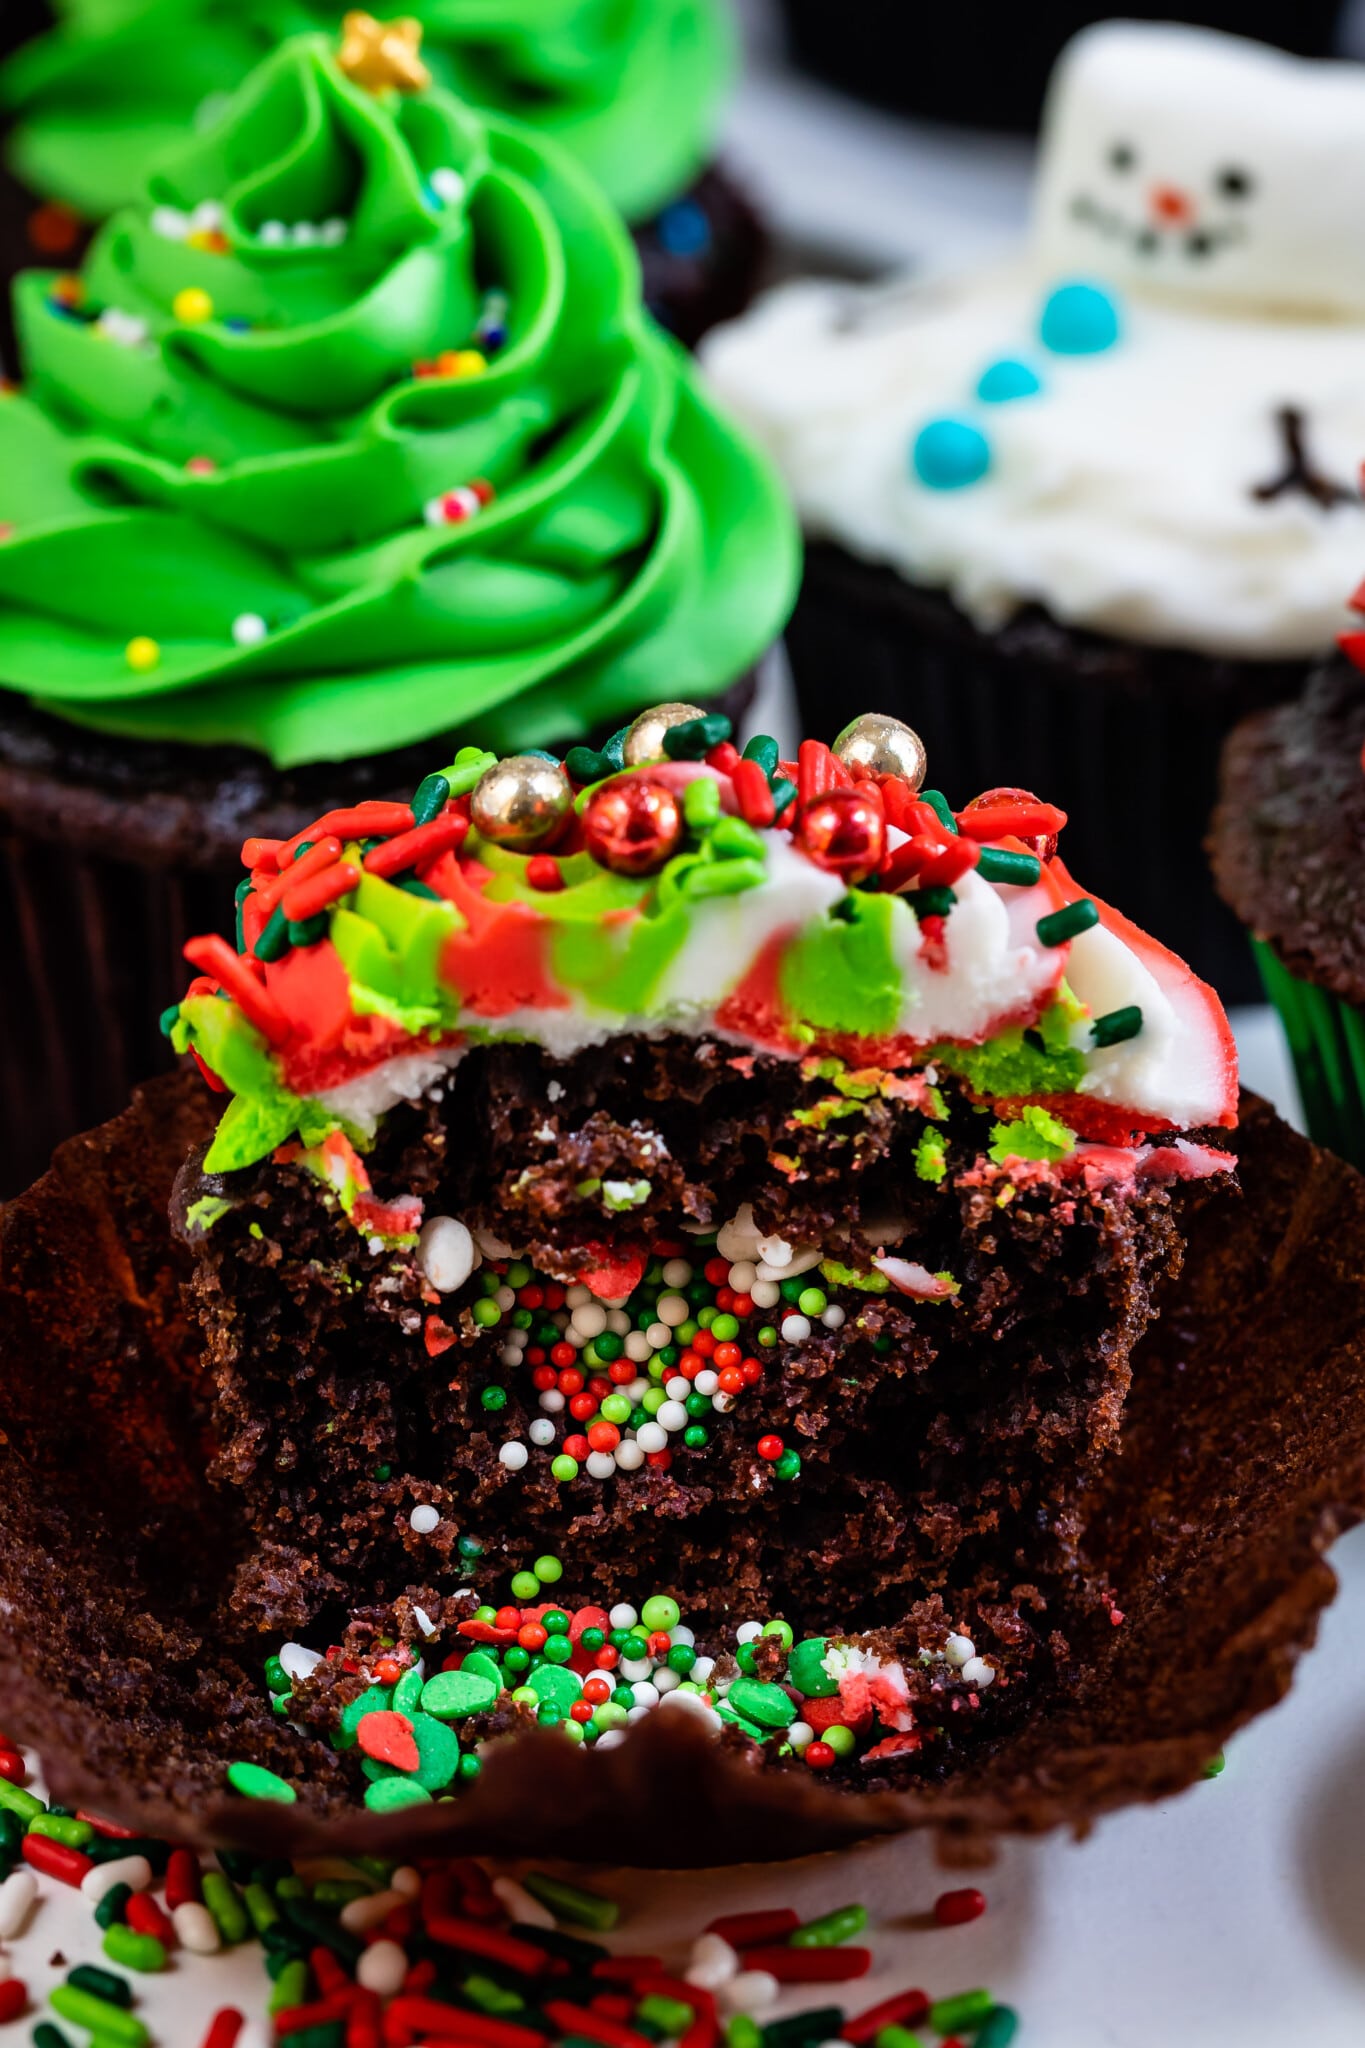 chocolate cupcake sliced open with sprinkles inside and swirled frosting